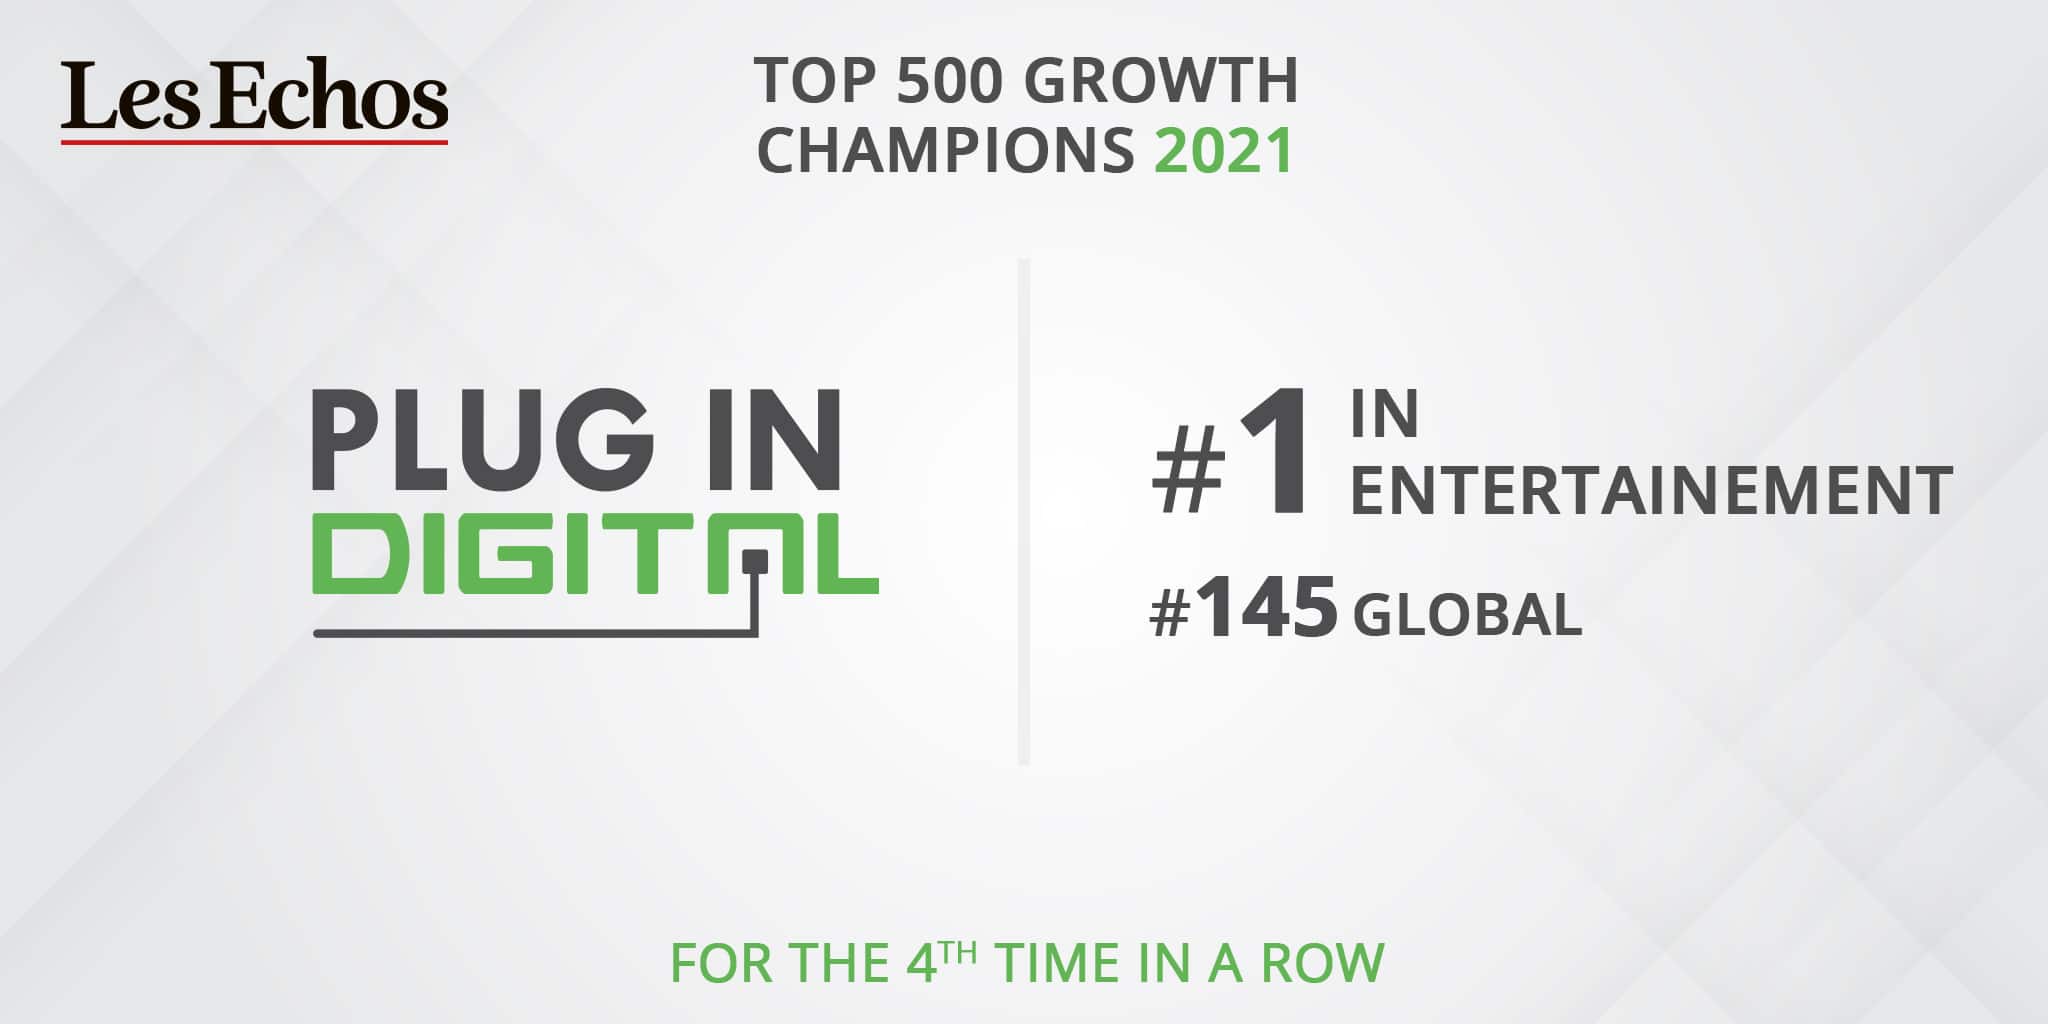 Plug In Digital ranked in Top 500 Growth Champions